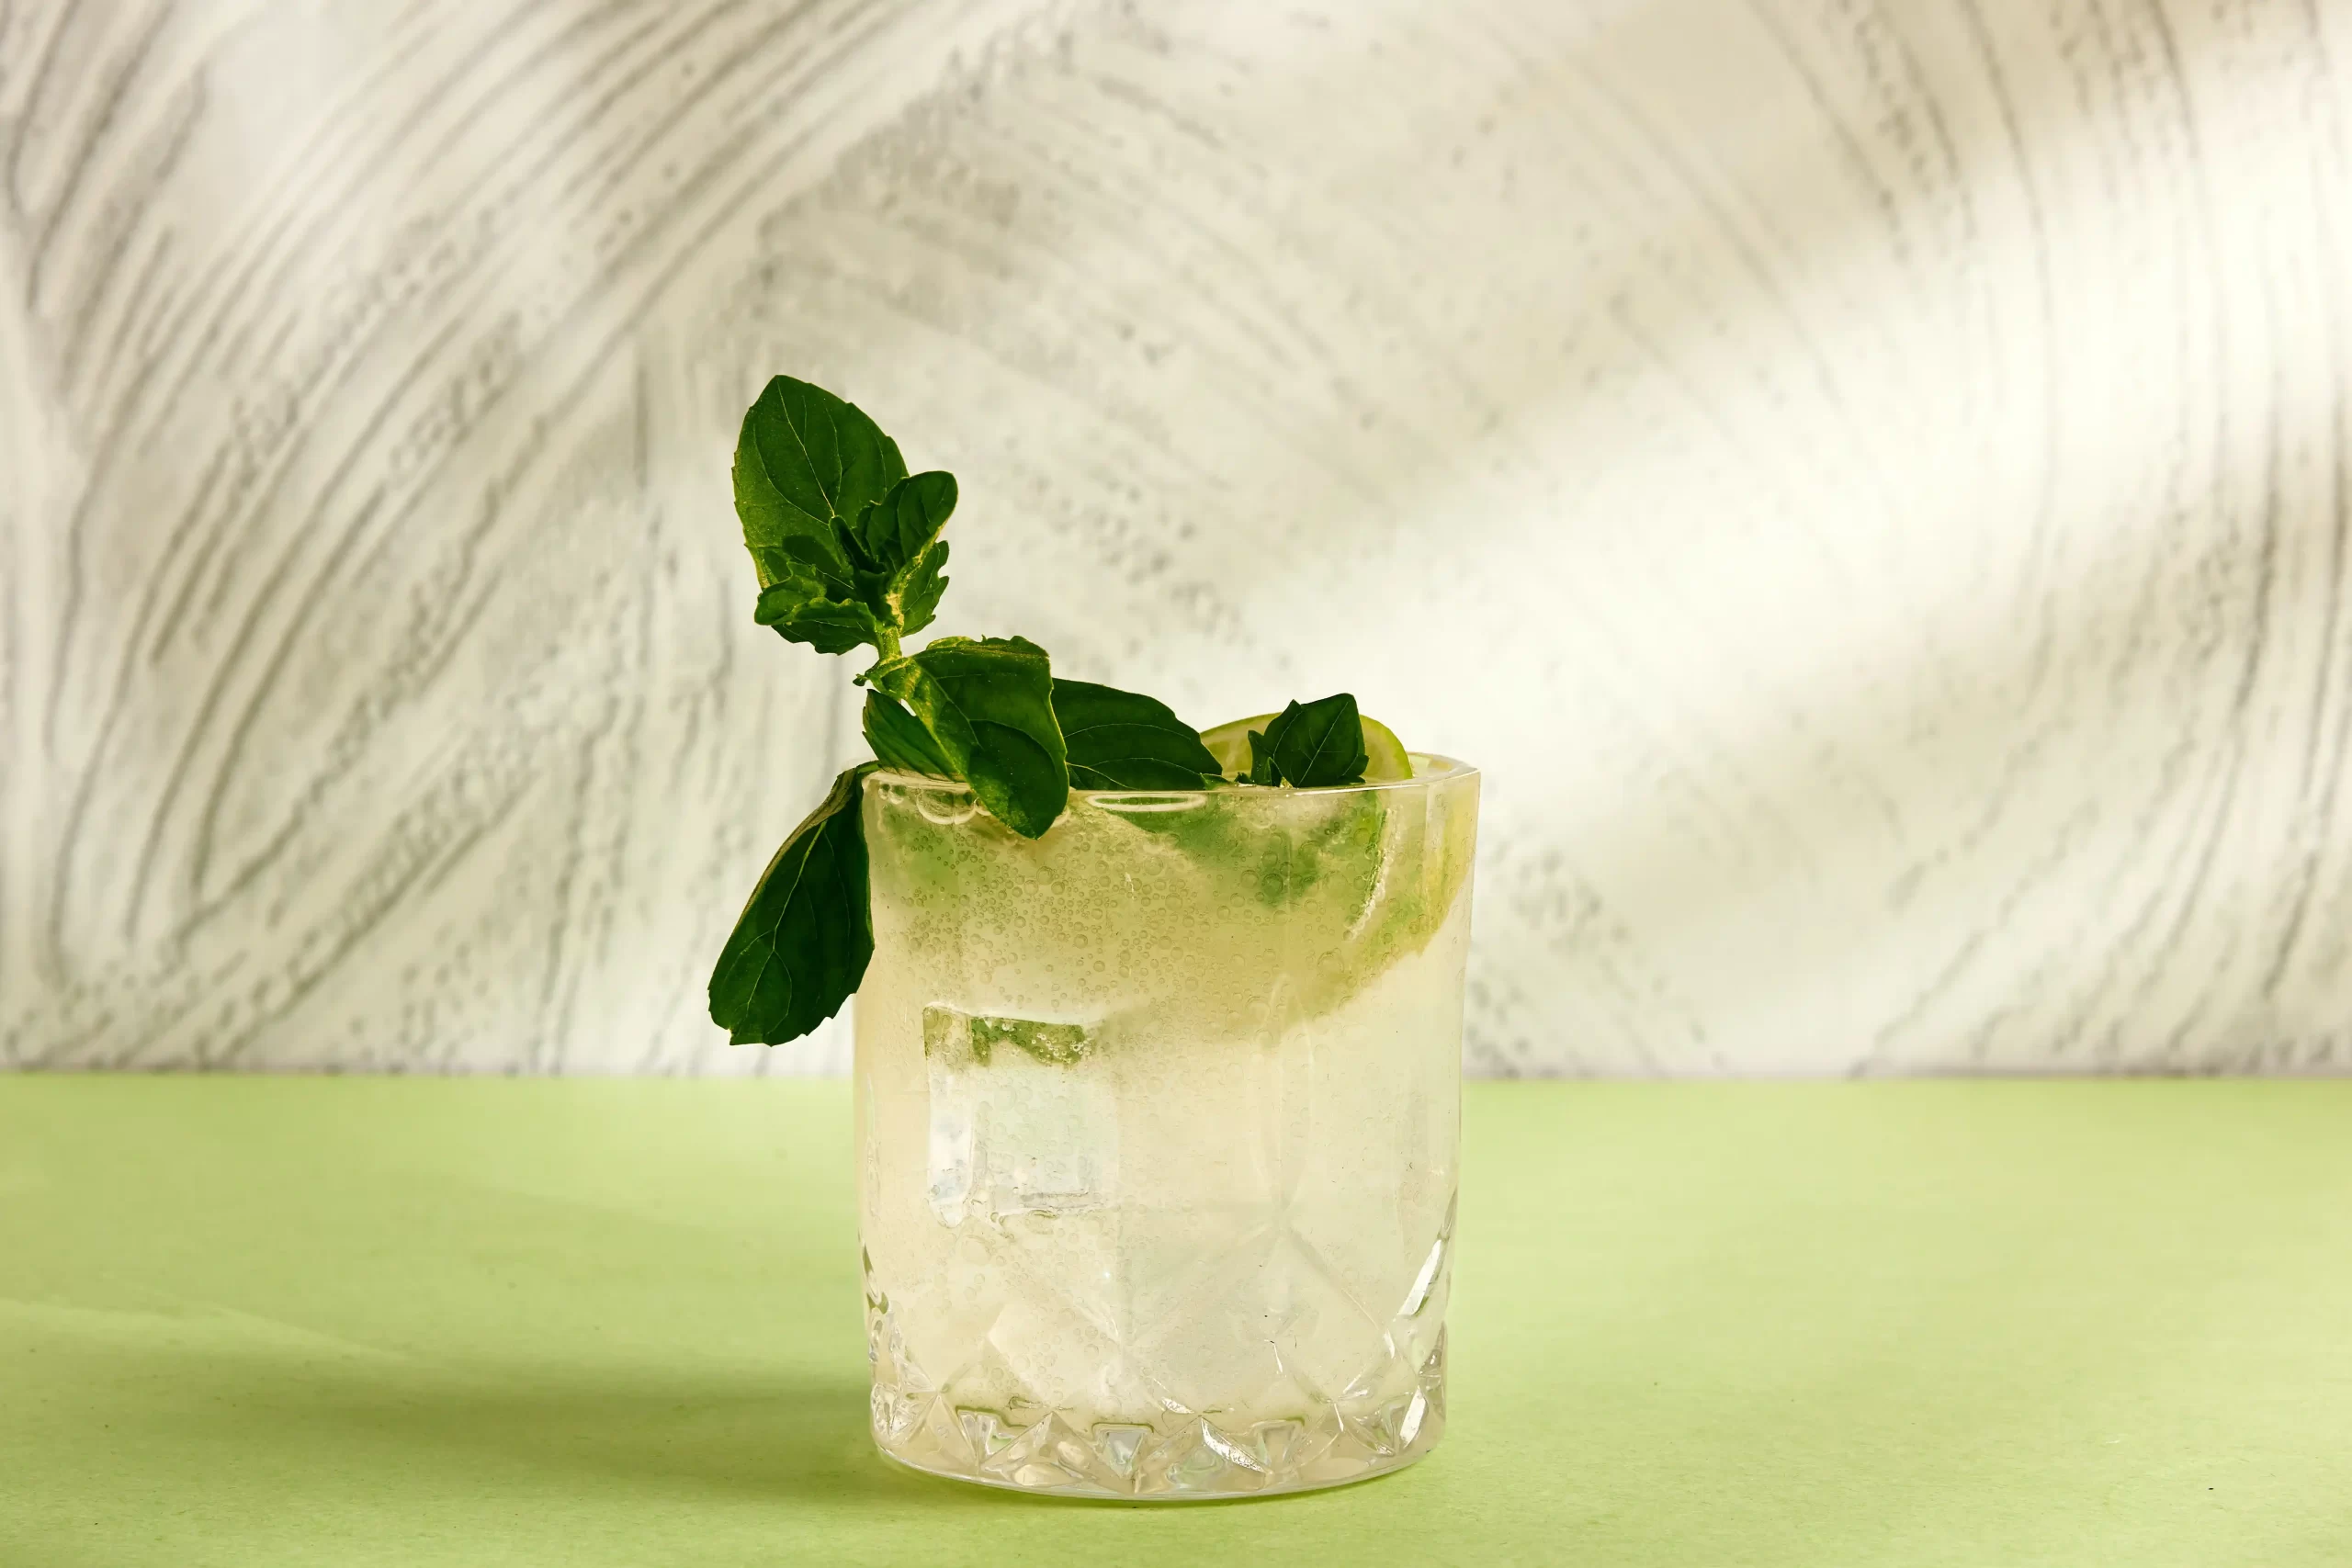 Old Maid cocktail with mint garnish on green tabletop with white background